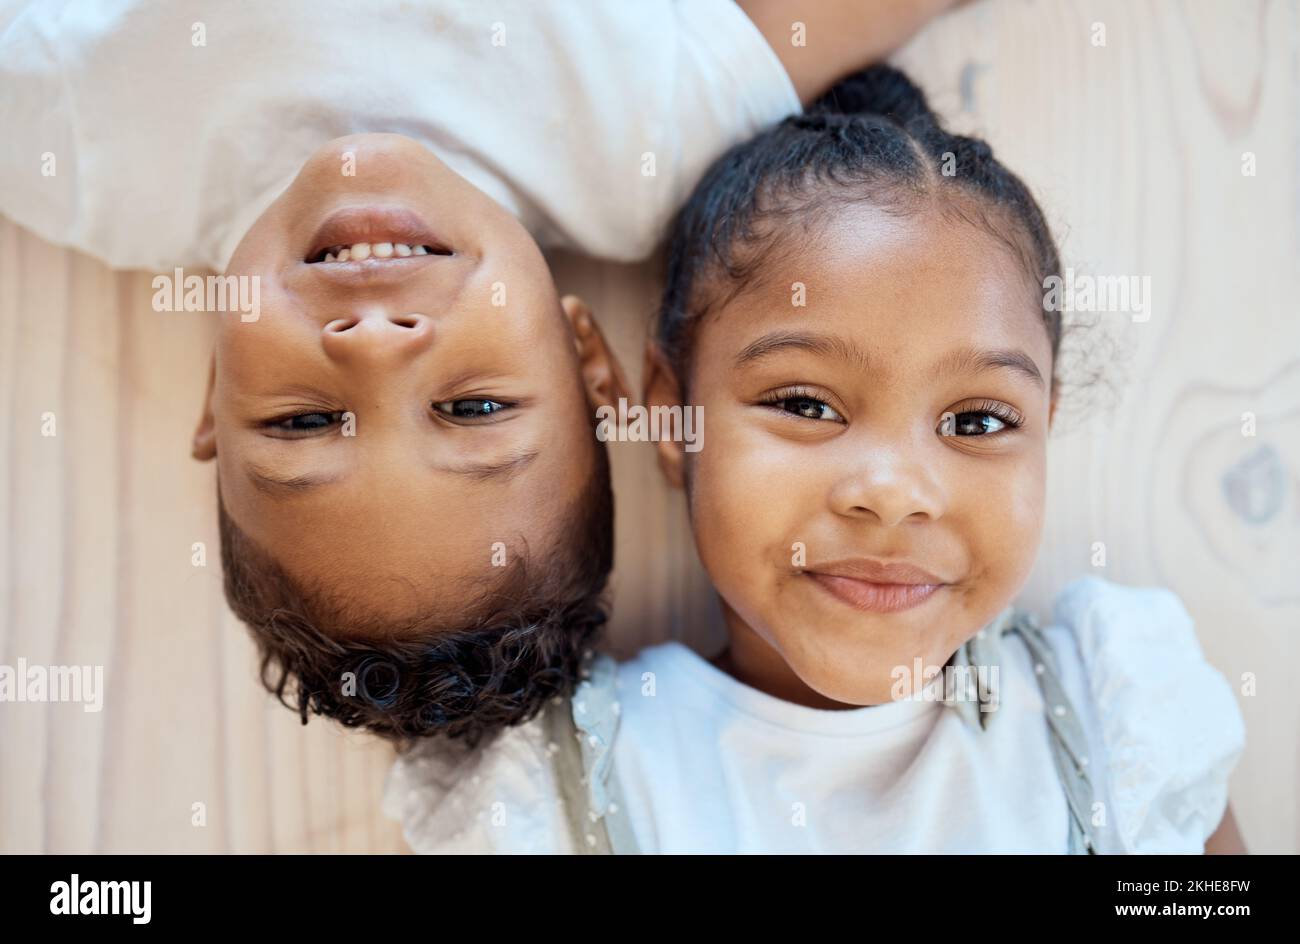 Family friends, smile and children portrait of siblings with happiness, bonding and love at home. Faces of happy kids together above view of brother Stock Photo